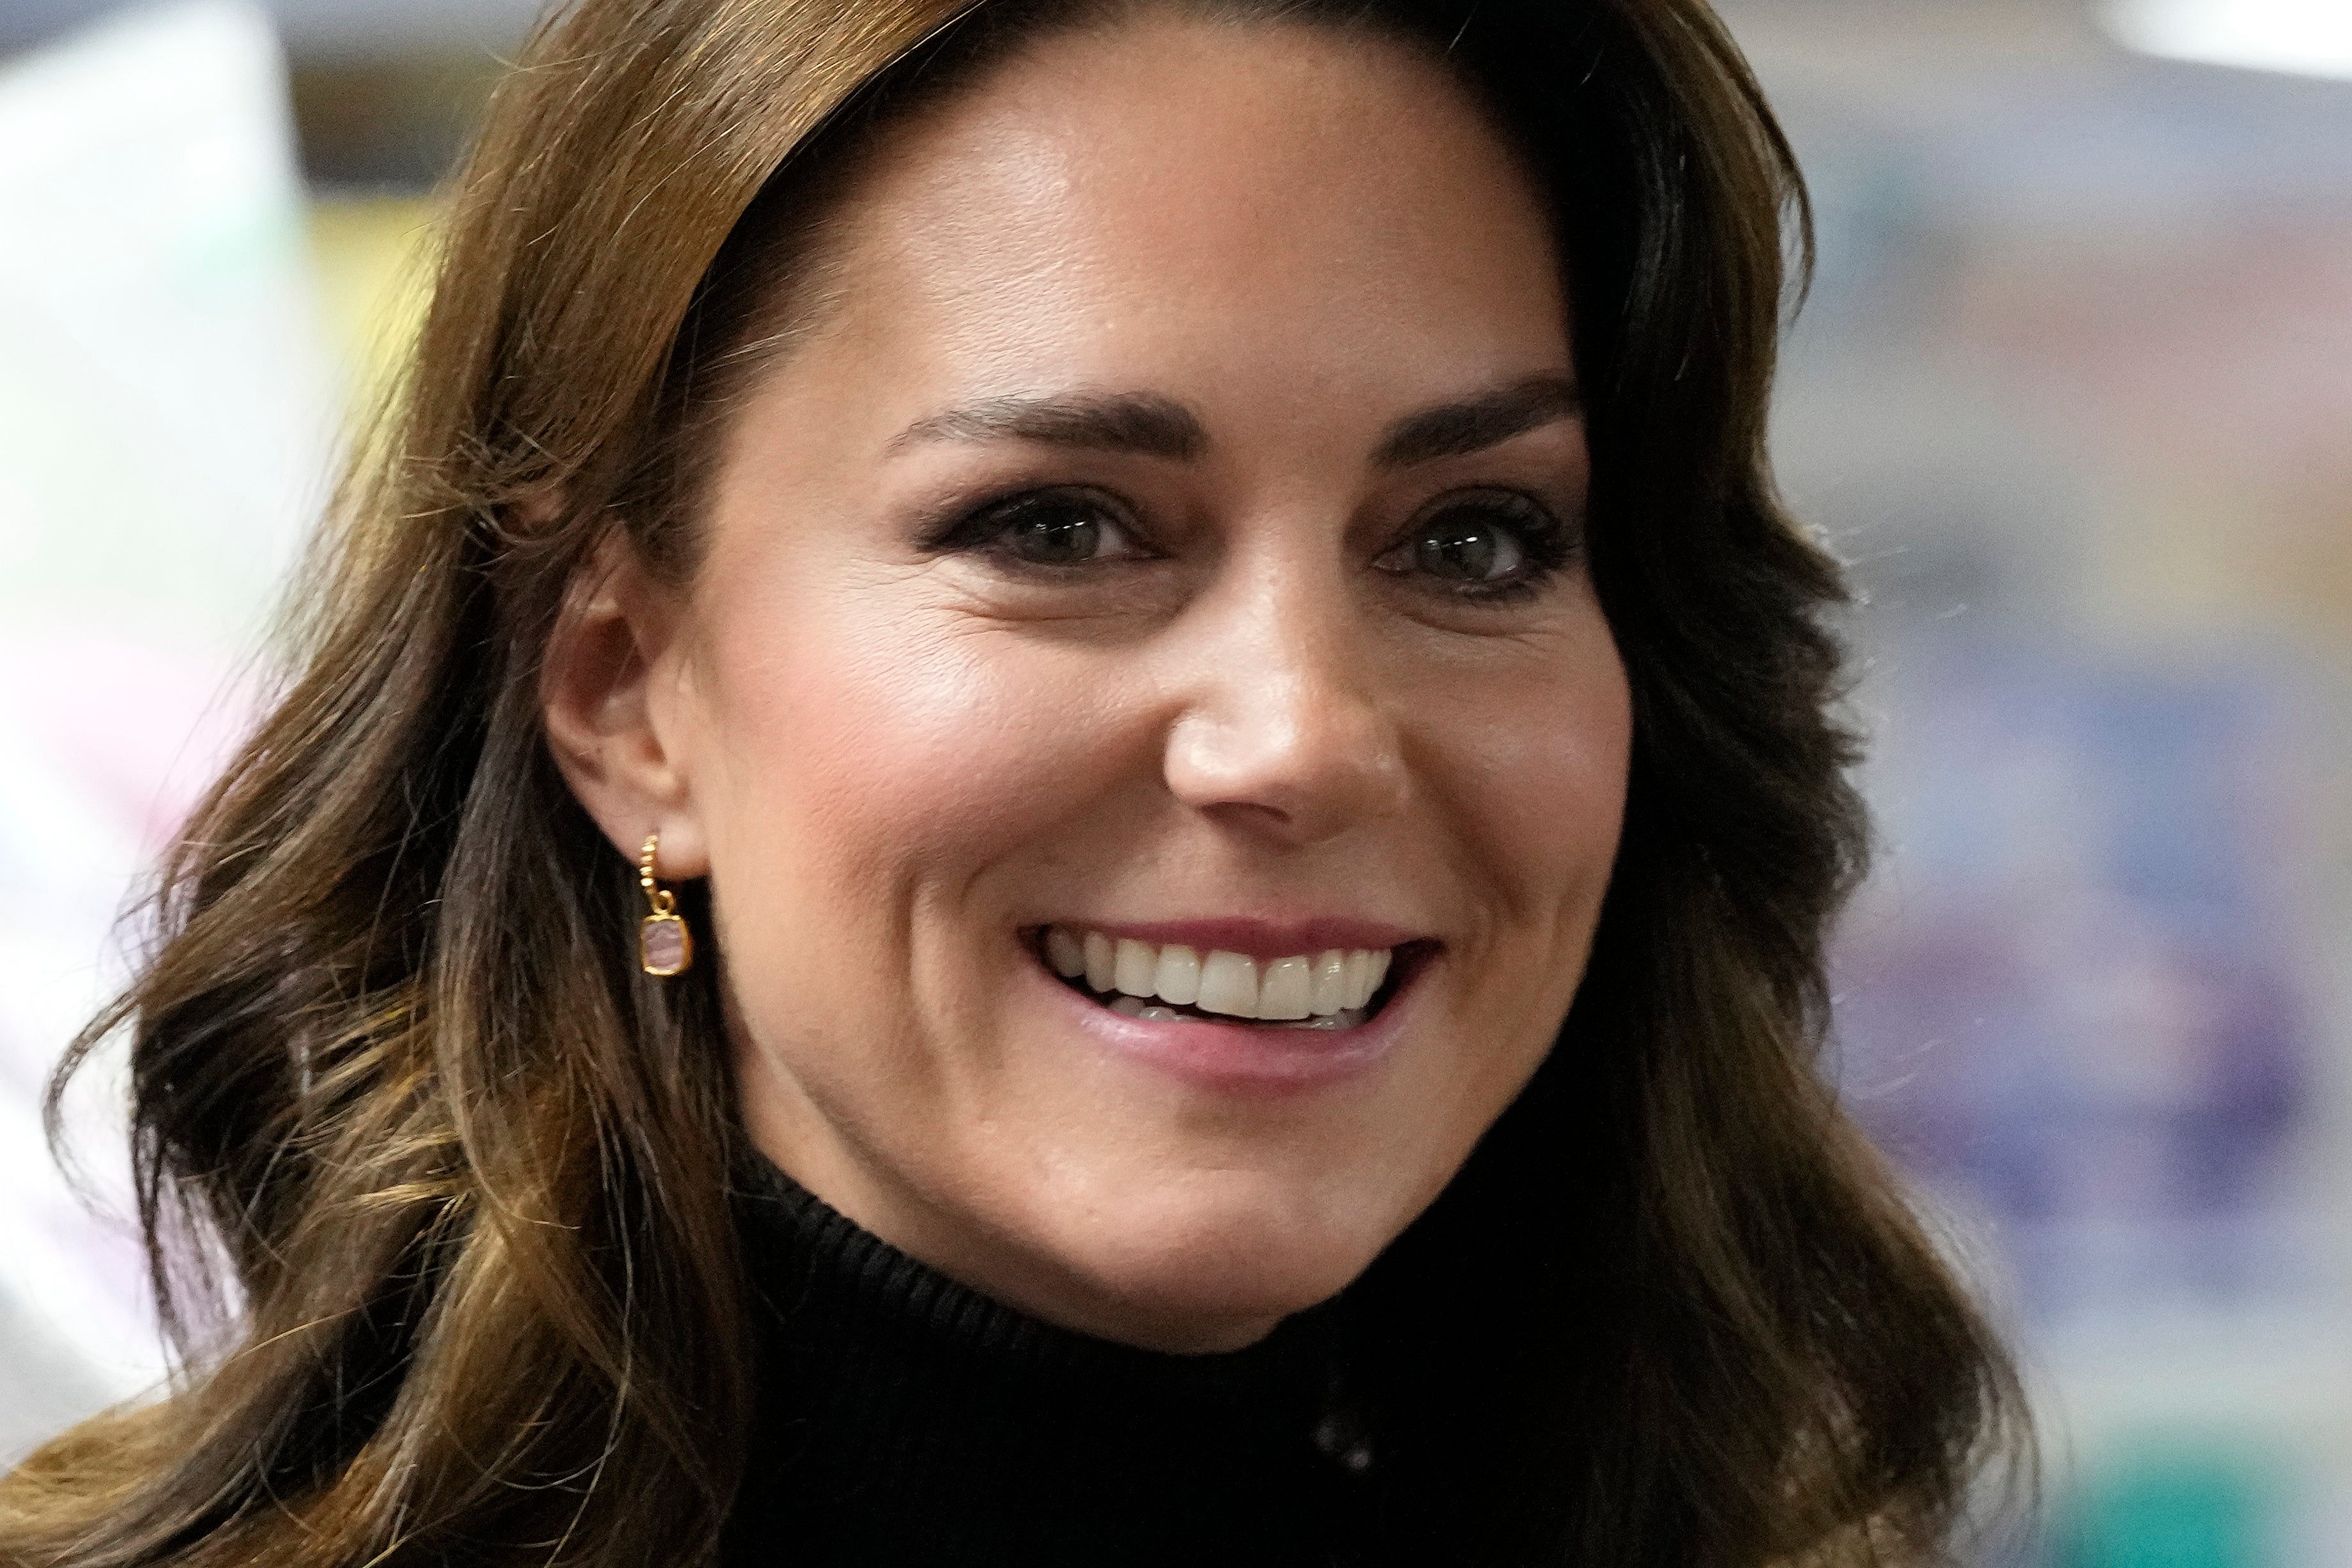 Palace Addresses Rumors Surrounding Kate Middleton’s Social Media Activity and Health